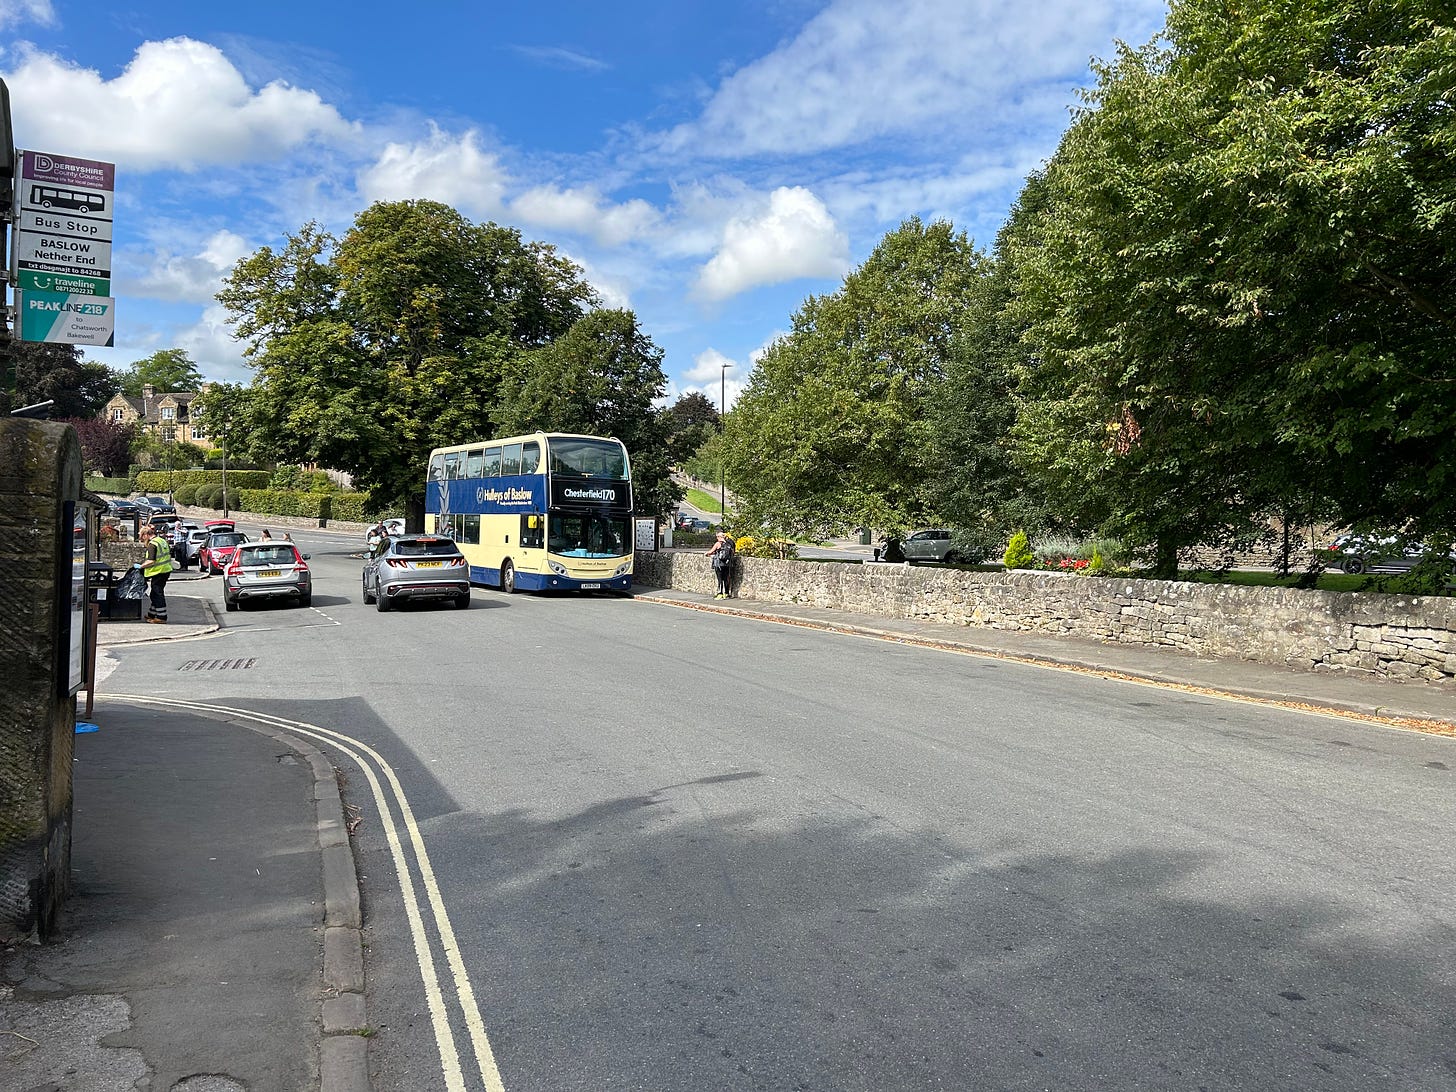 A Hulleys double decker standing at the bus stop at The Green, Baslow, Derbyshire. Image: Roland's Travels